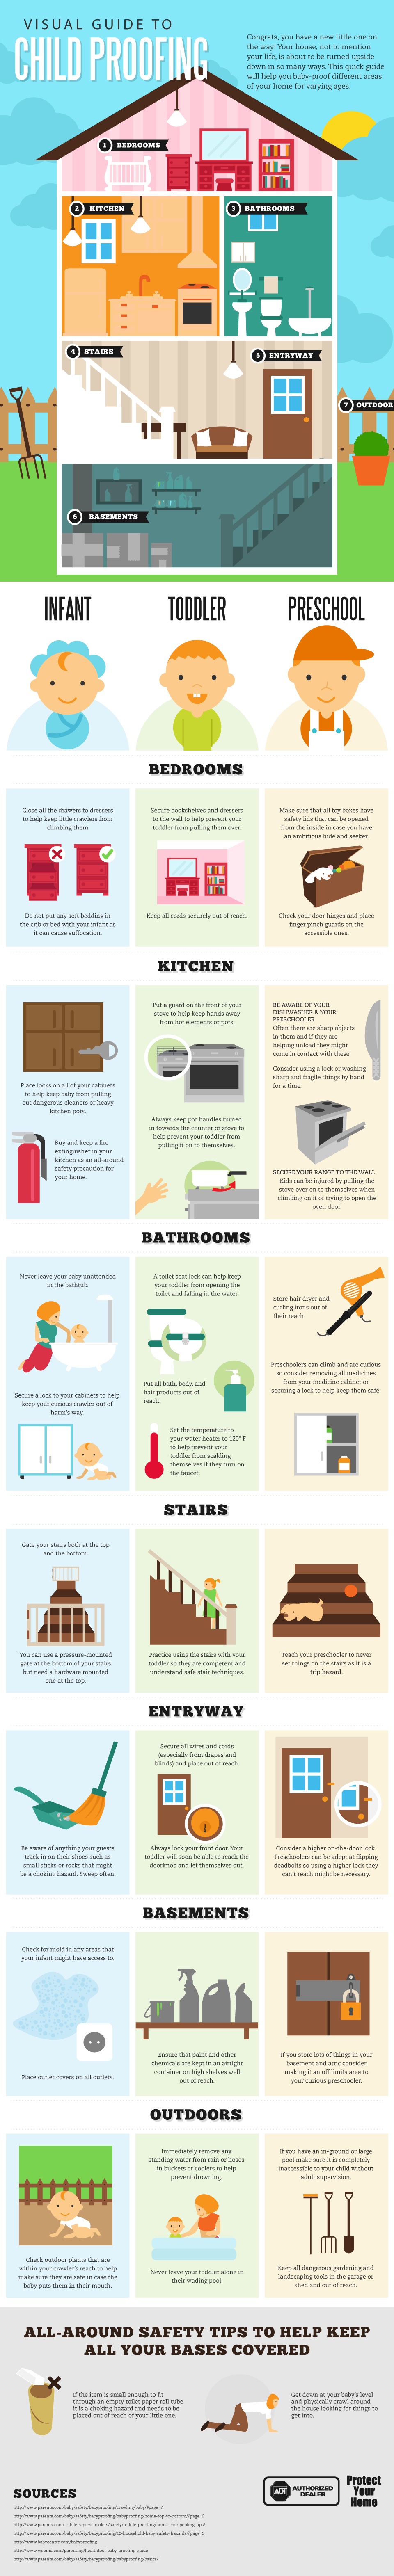 Visual Guide to Child Proofing Your Home